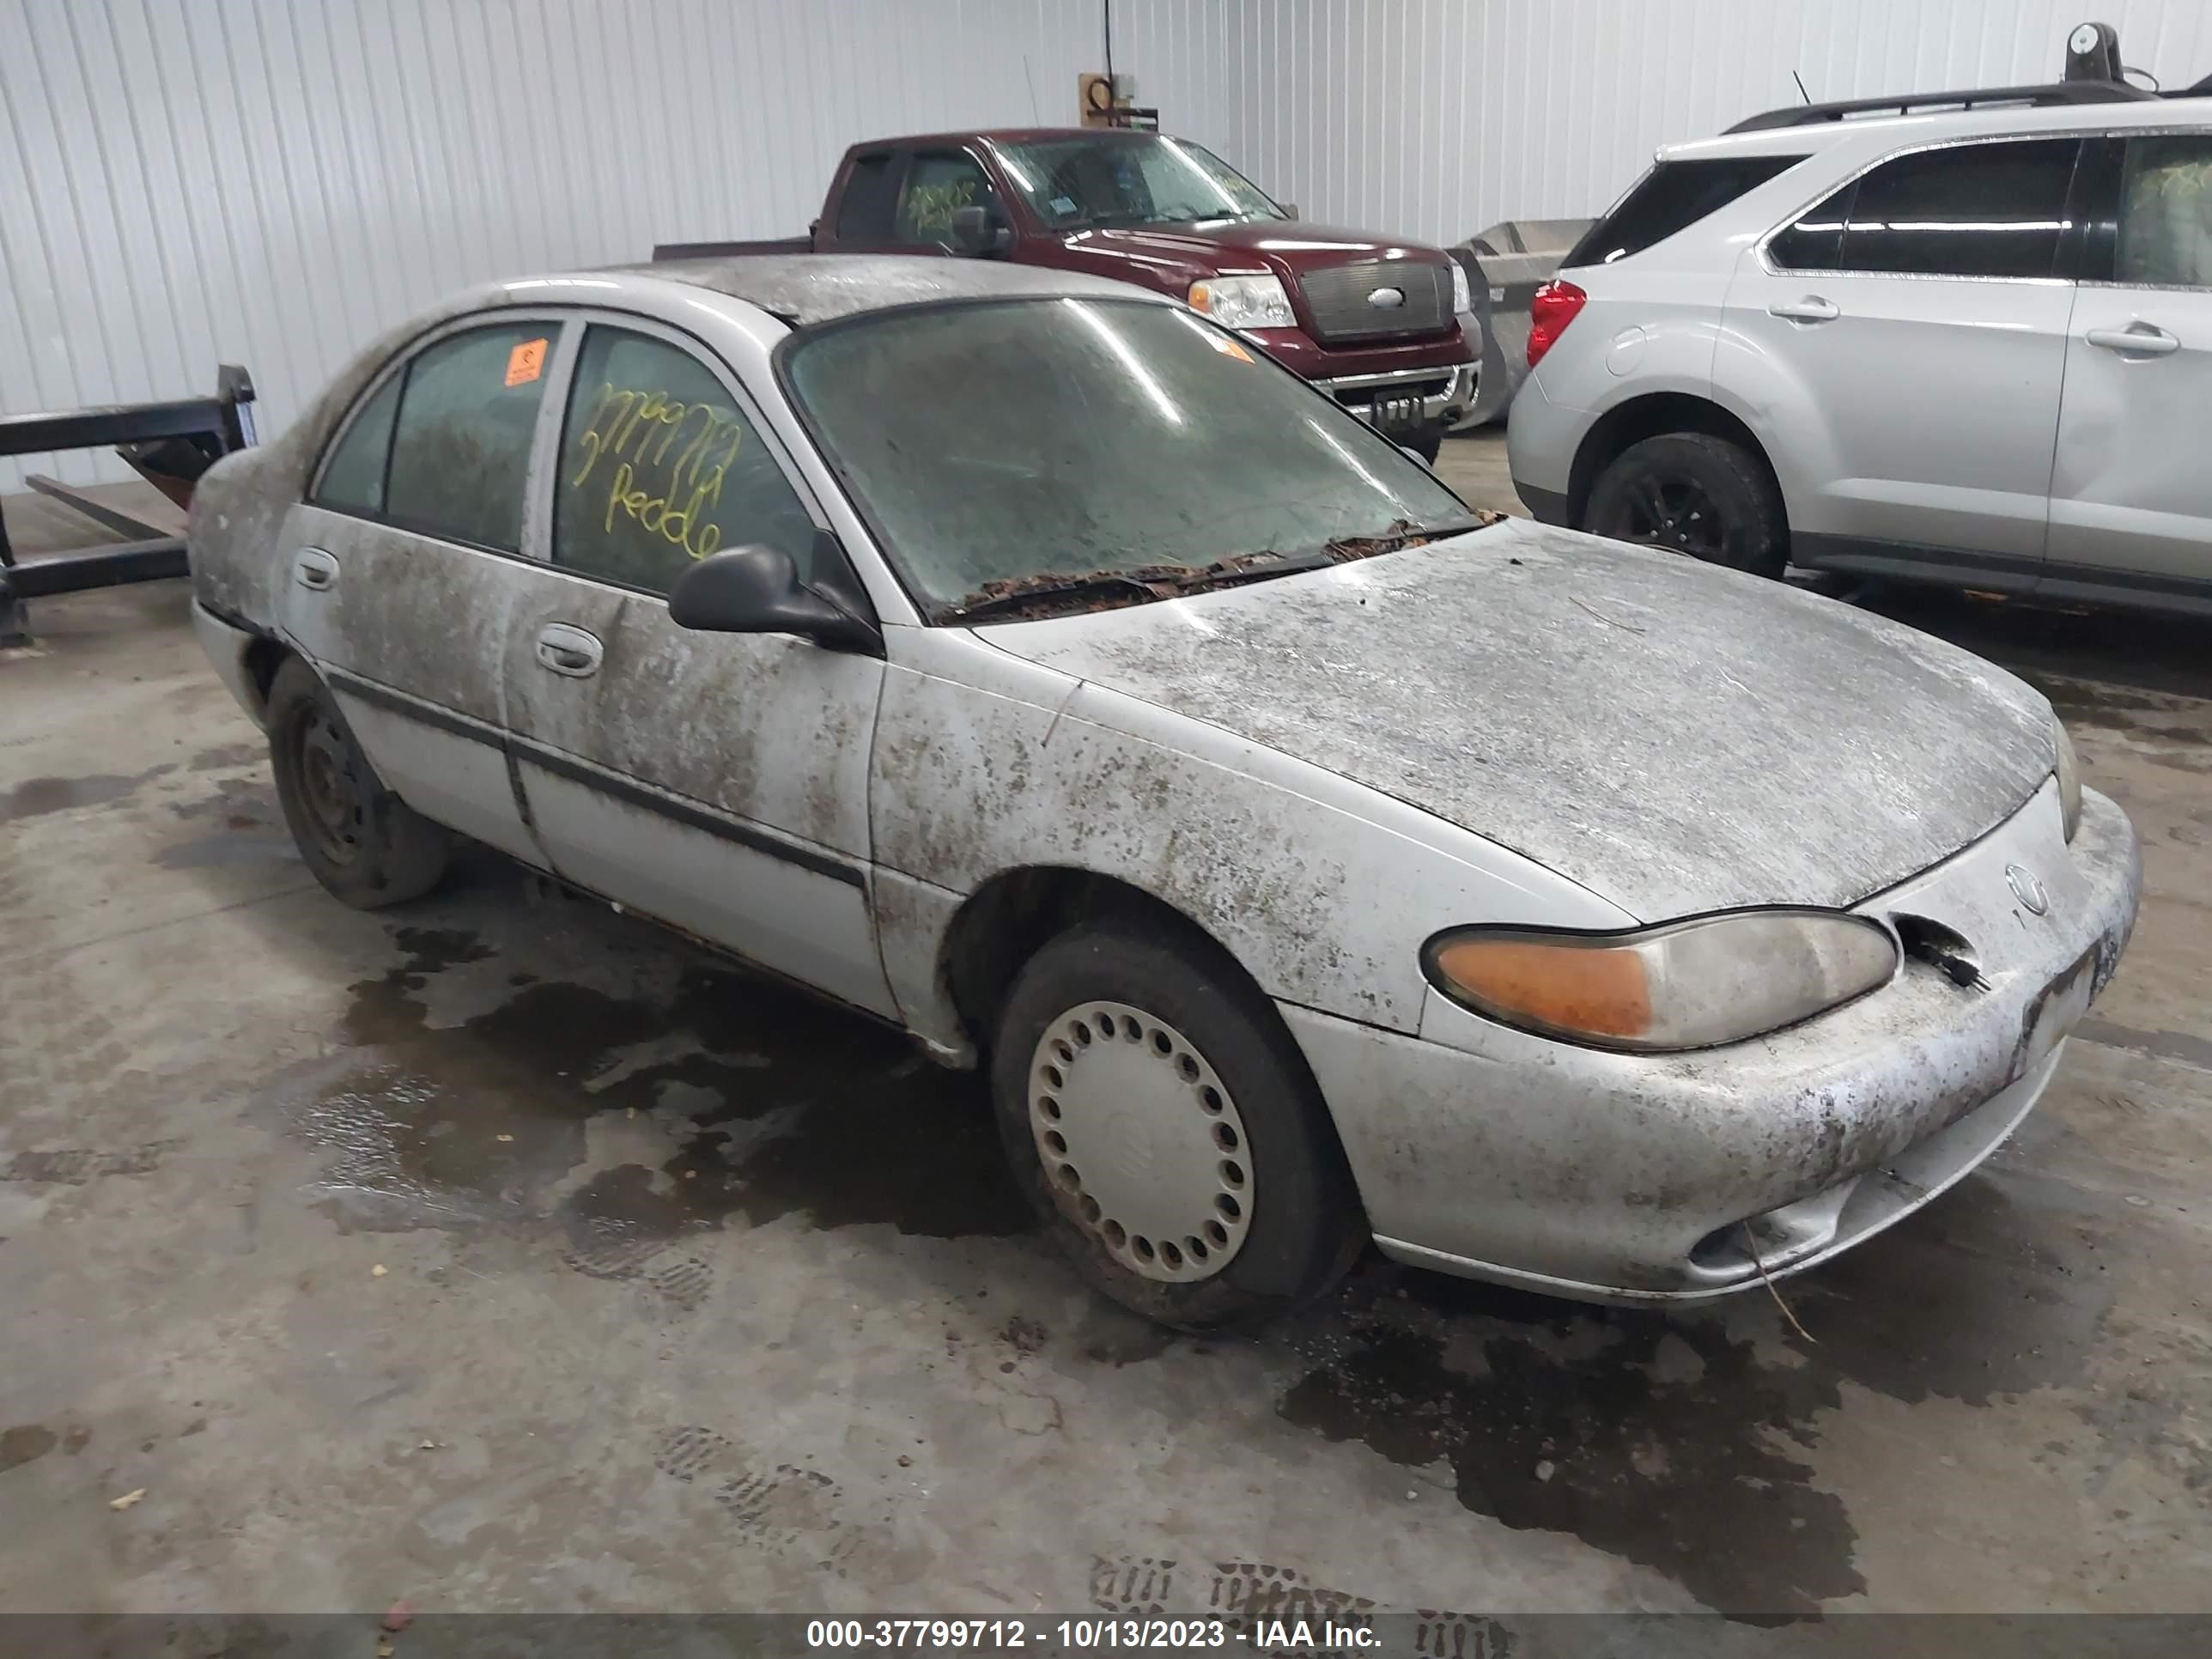 vin: 1MELM10P7VW631707 1MELM10P7VW631707 1997 mercury tracer 2000 for Sale in 56367, 13289 25Th Ave Nw, Rice, Minnesota, USA